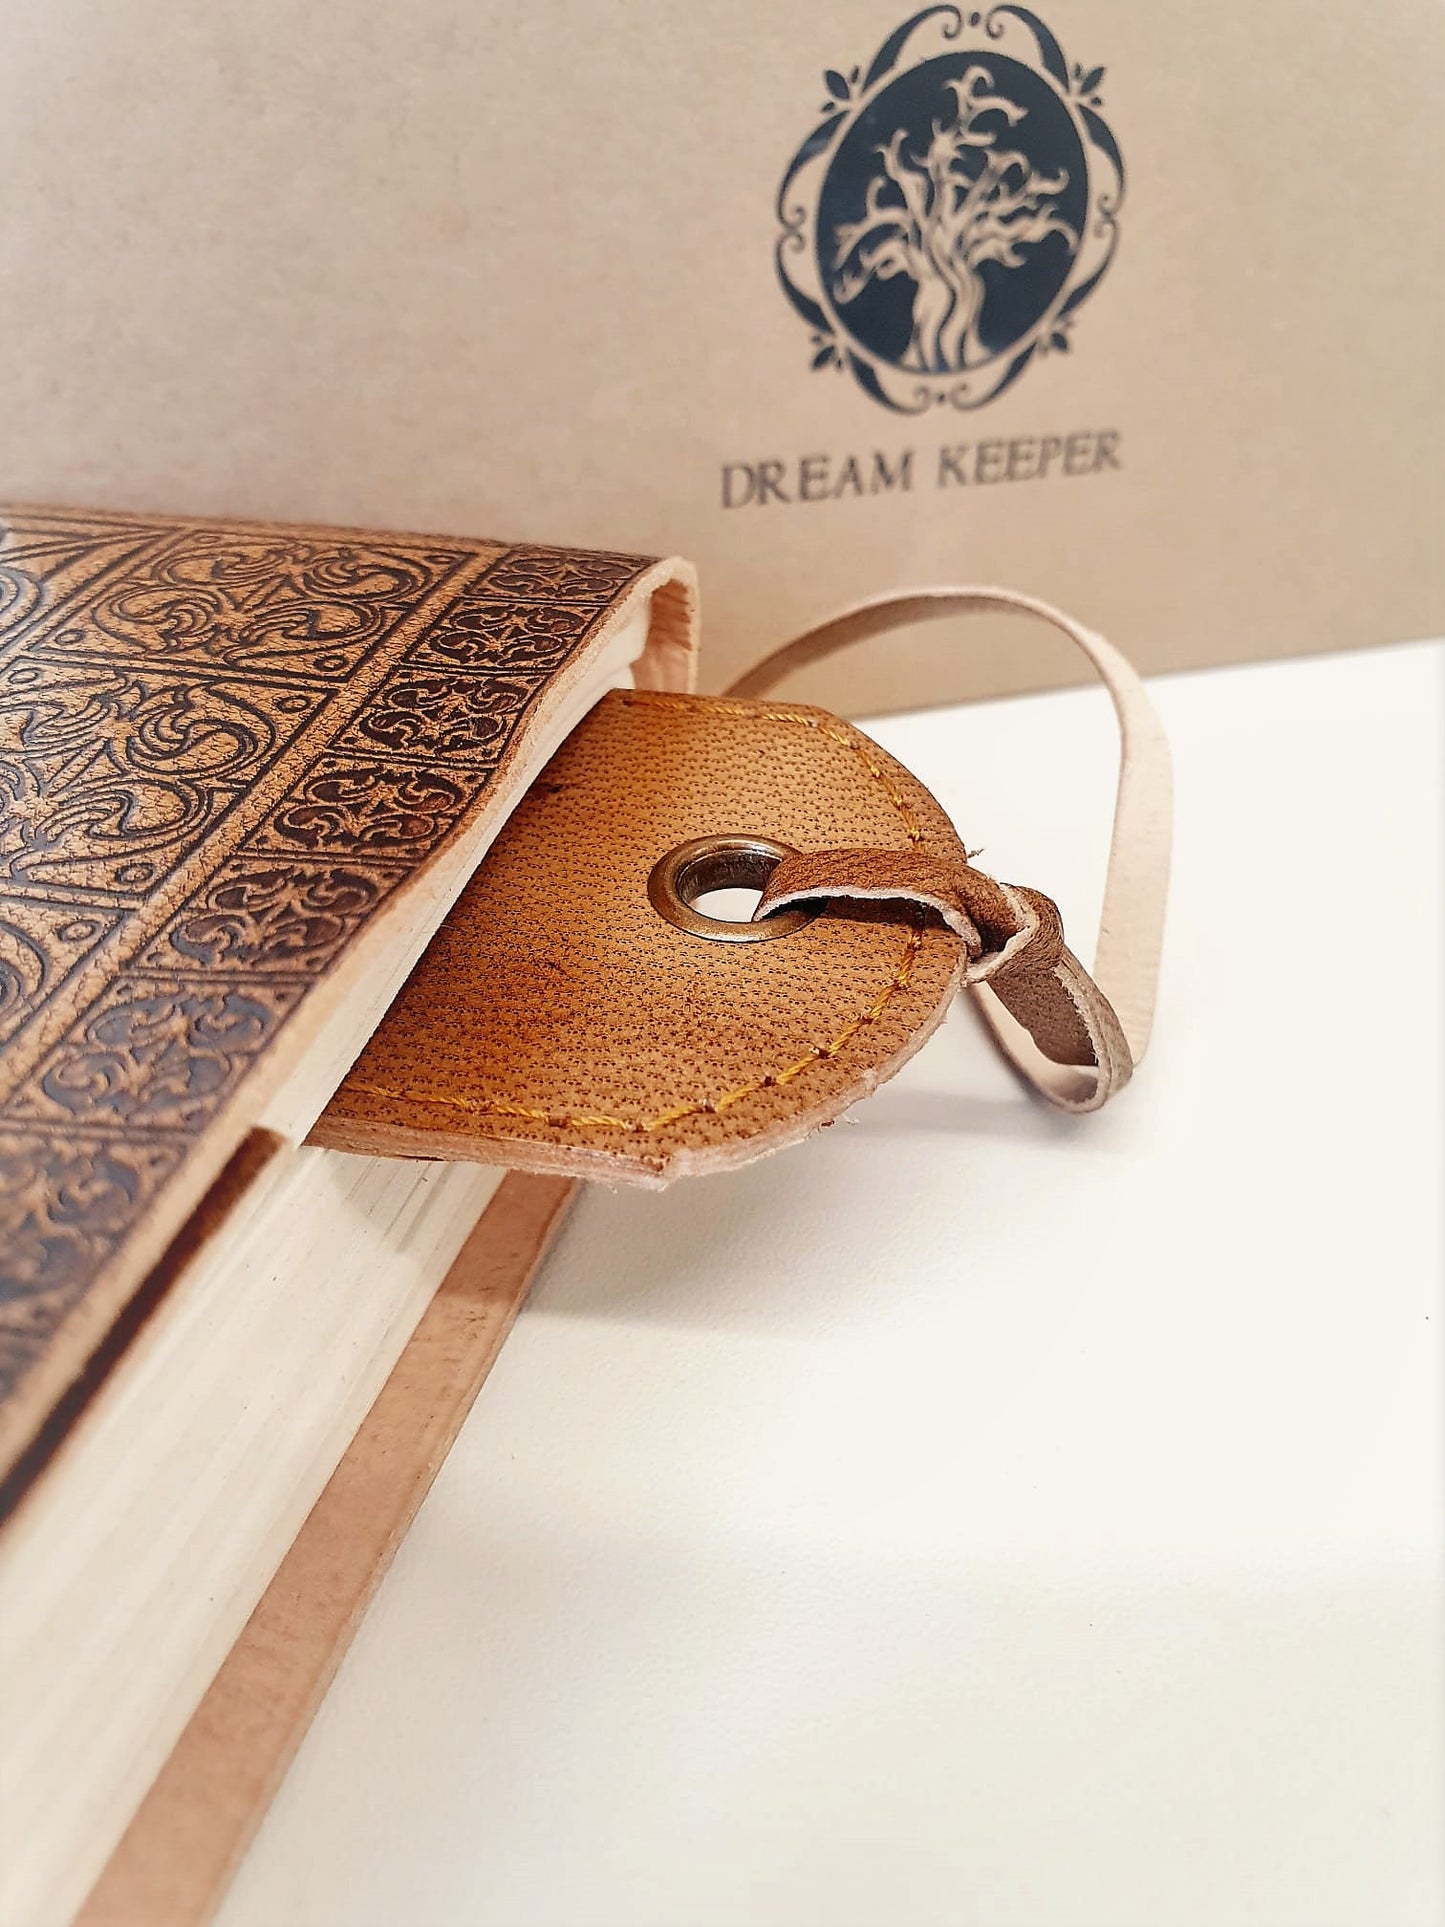 Pair of Handmade Leather Bookmark with DreamKeeper Tree of Life Design - Aisling